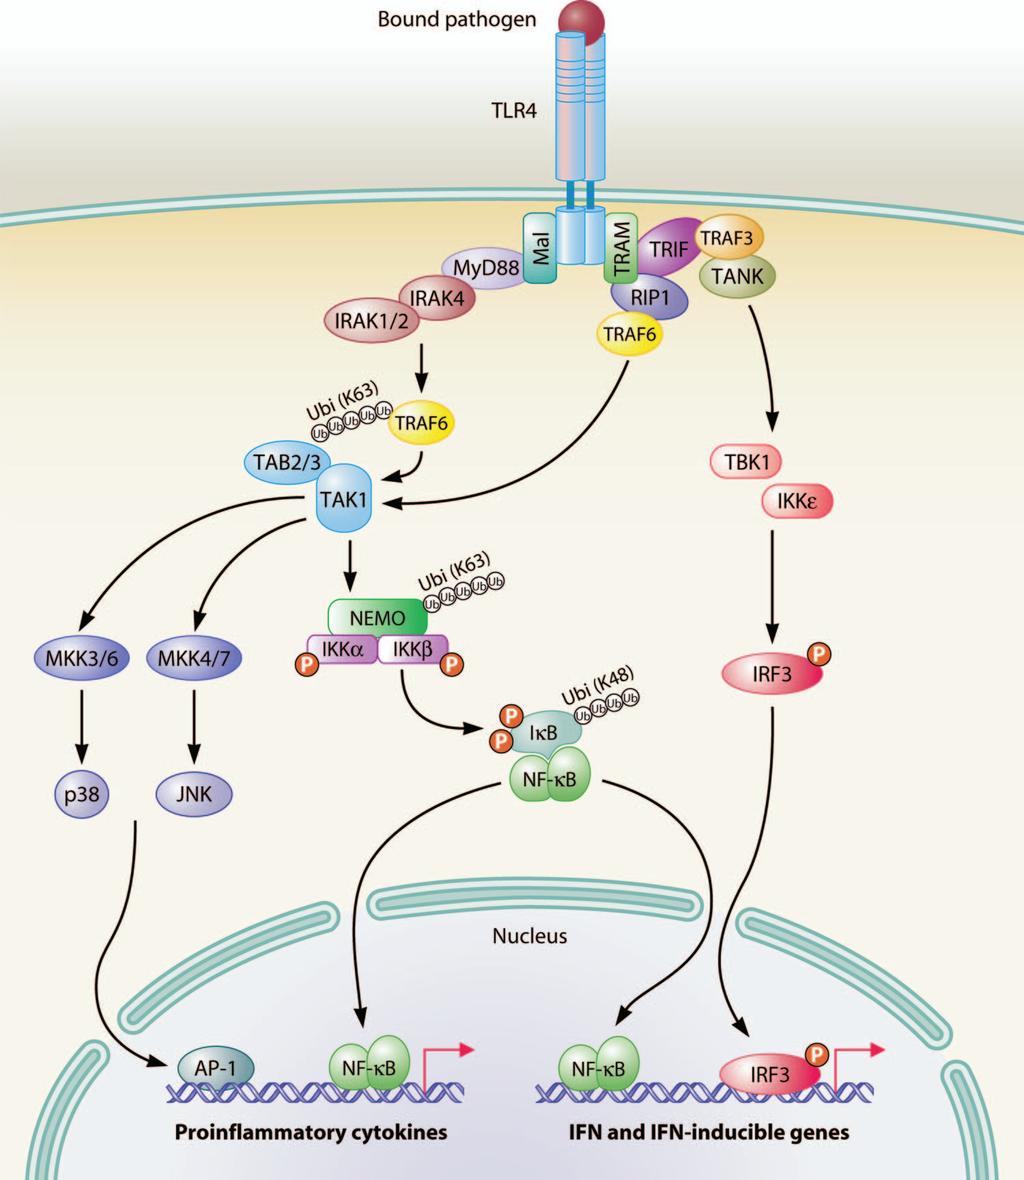 250 MOGENSEN CLIN. MICROBIOL. REV. FIG. 5. Principles in TLR signaling. TLR4 activates both the MyD88-dependent and MyD88-independent, TRIF-dependent pathways.